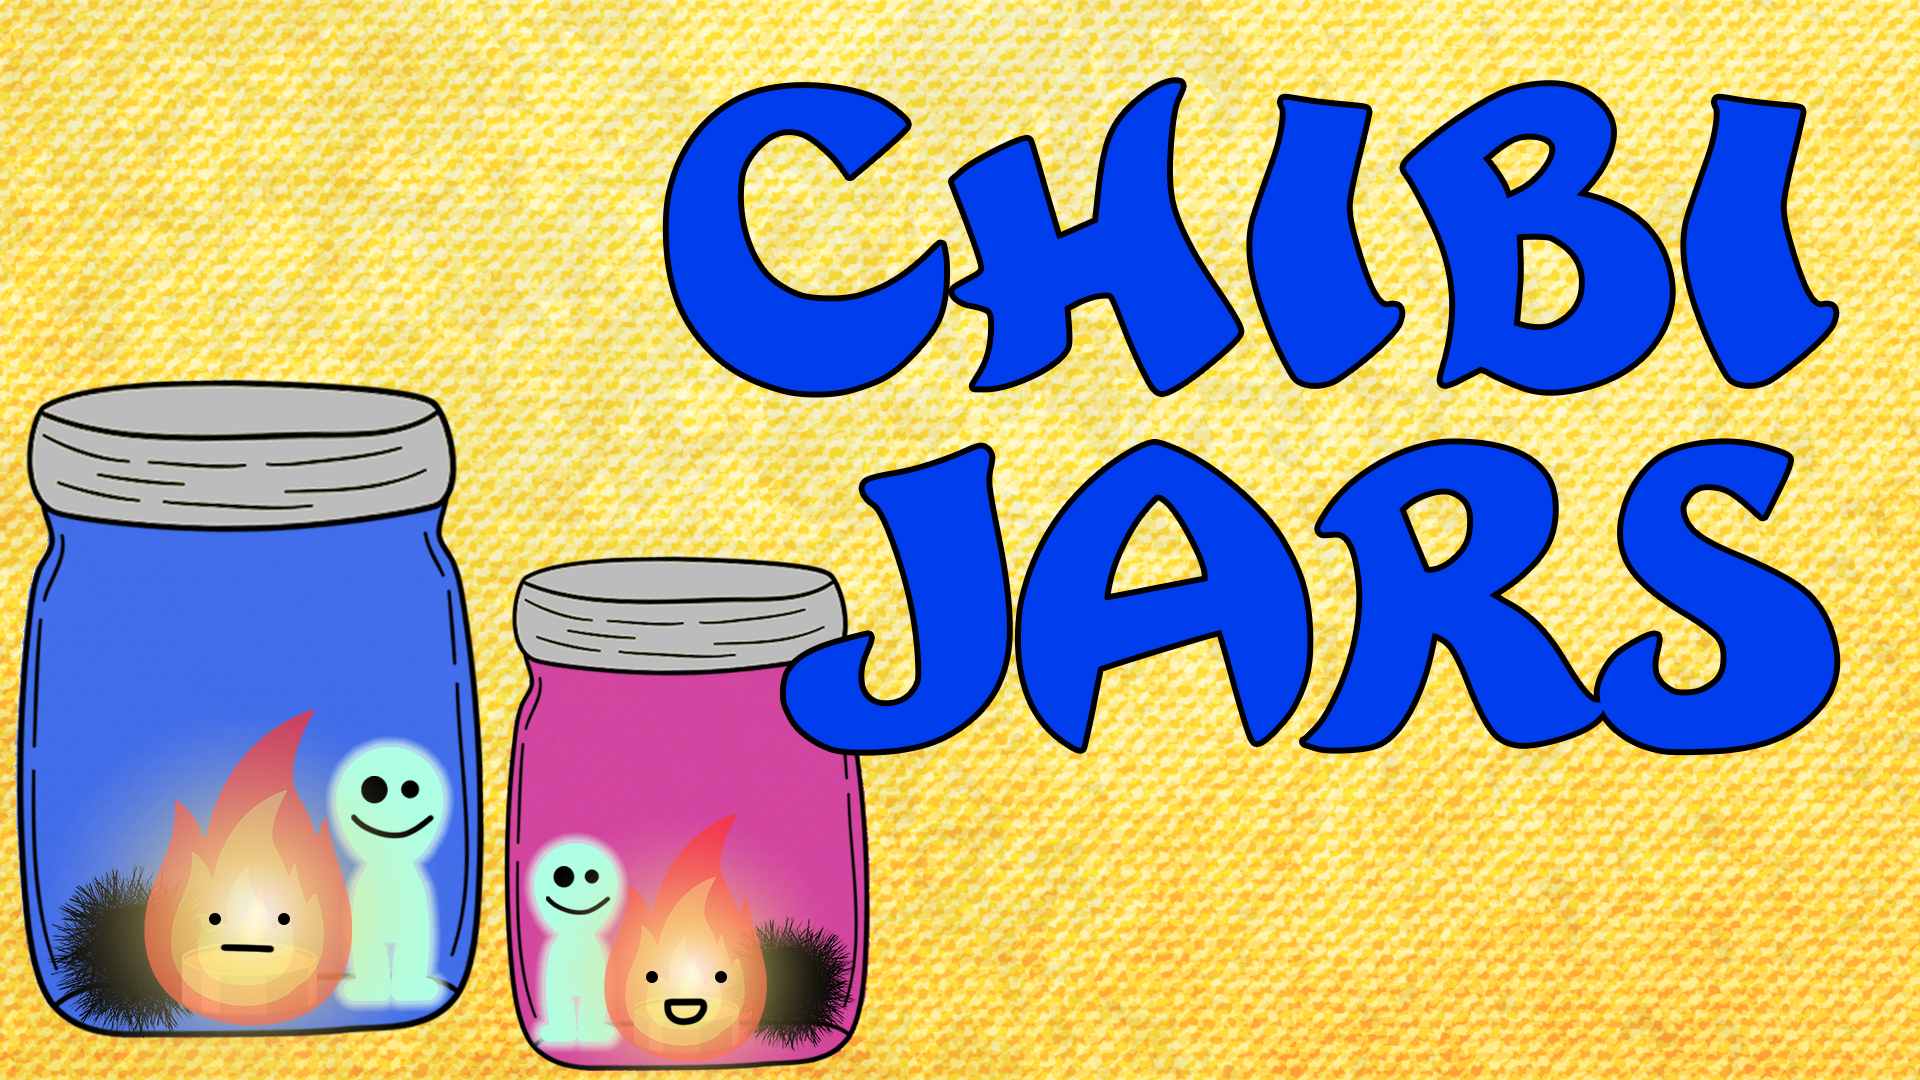 Image reads "Chibi Jars" against a yellow textured background. To the left of the title are two mason jars with a black pom-pom, glow-in-the-dark forest sprite, and a tealight candle inside the jar.